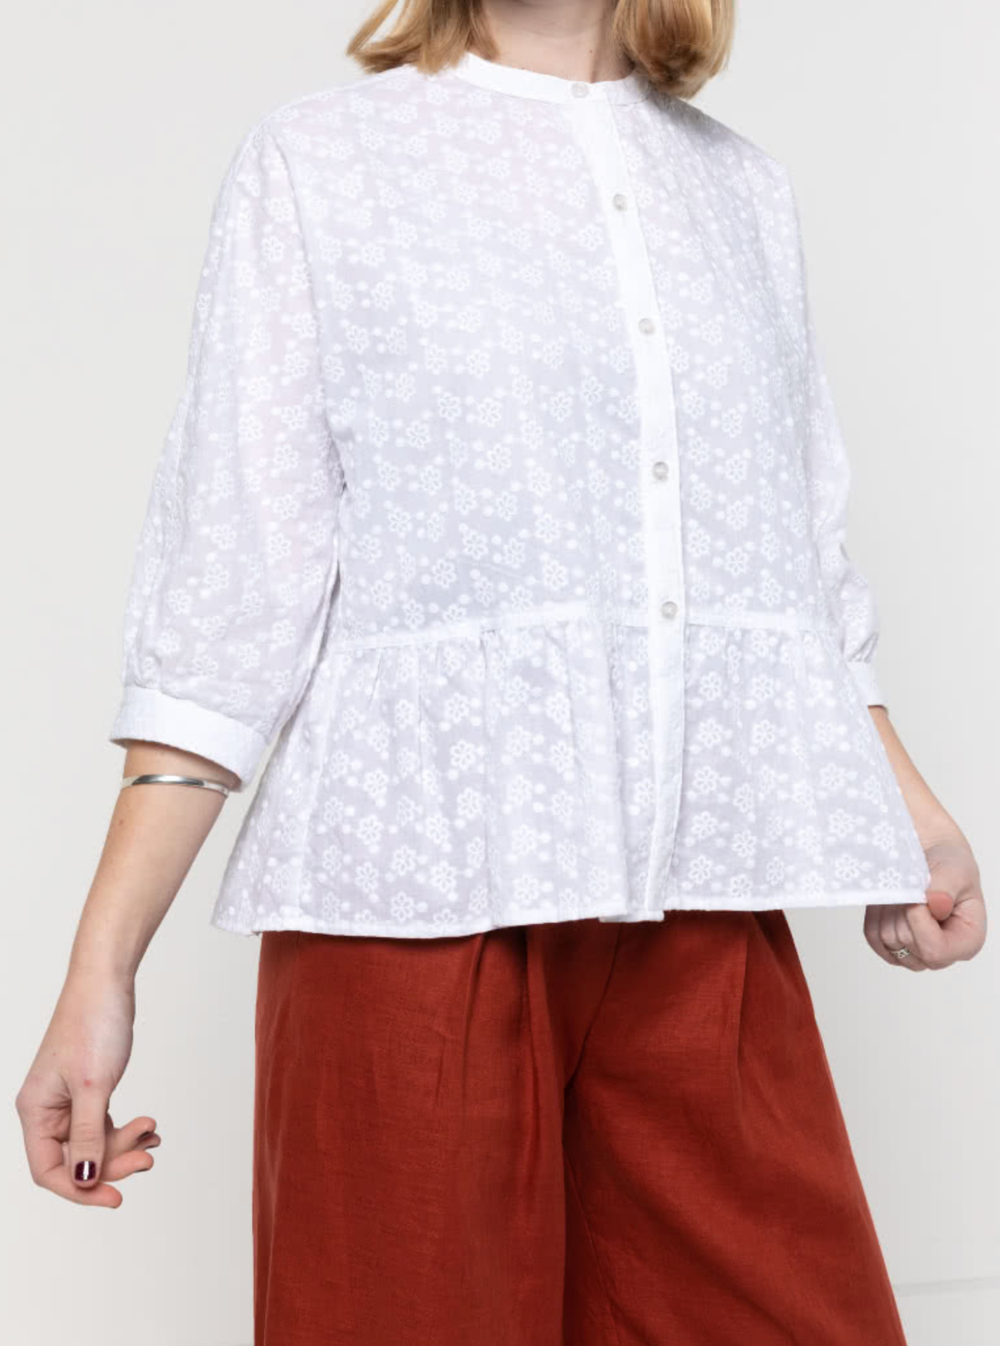 Style Arc Blossom Woven Top